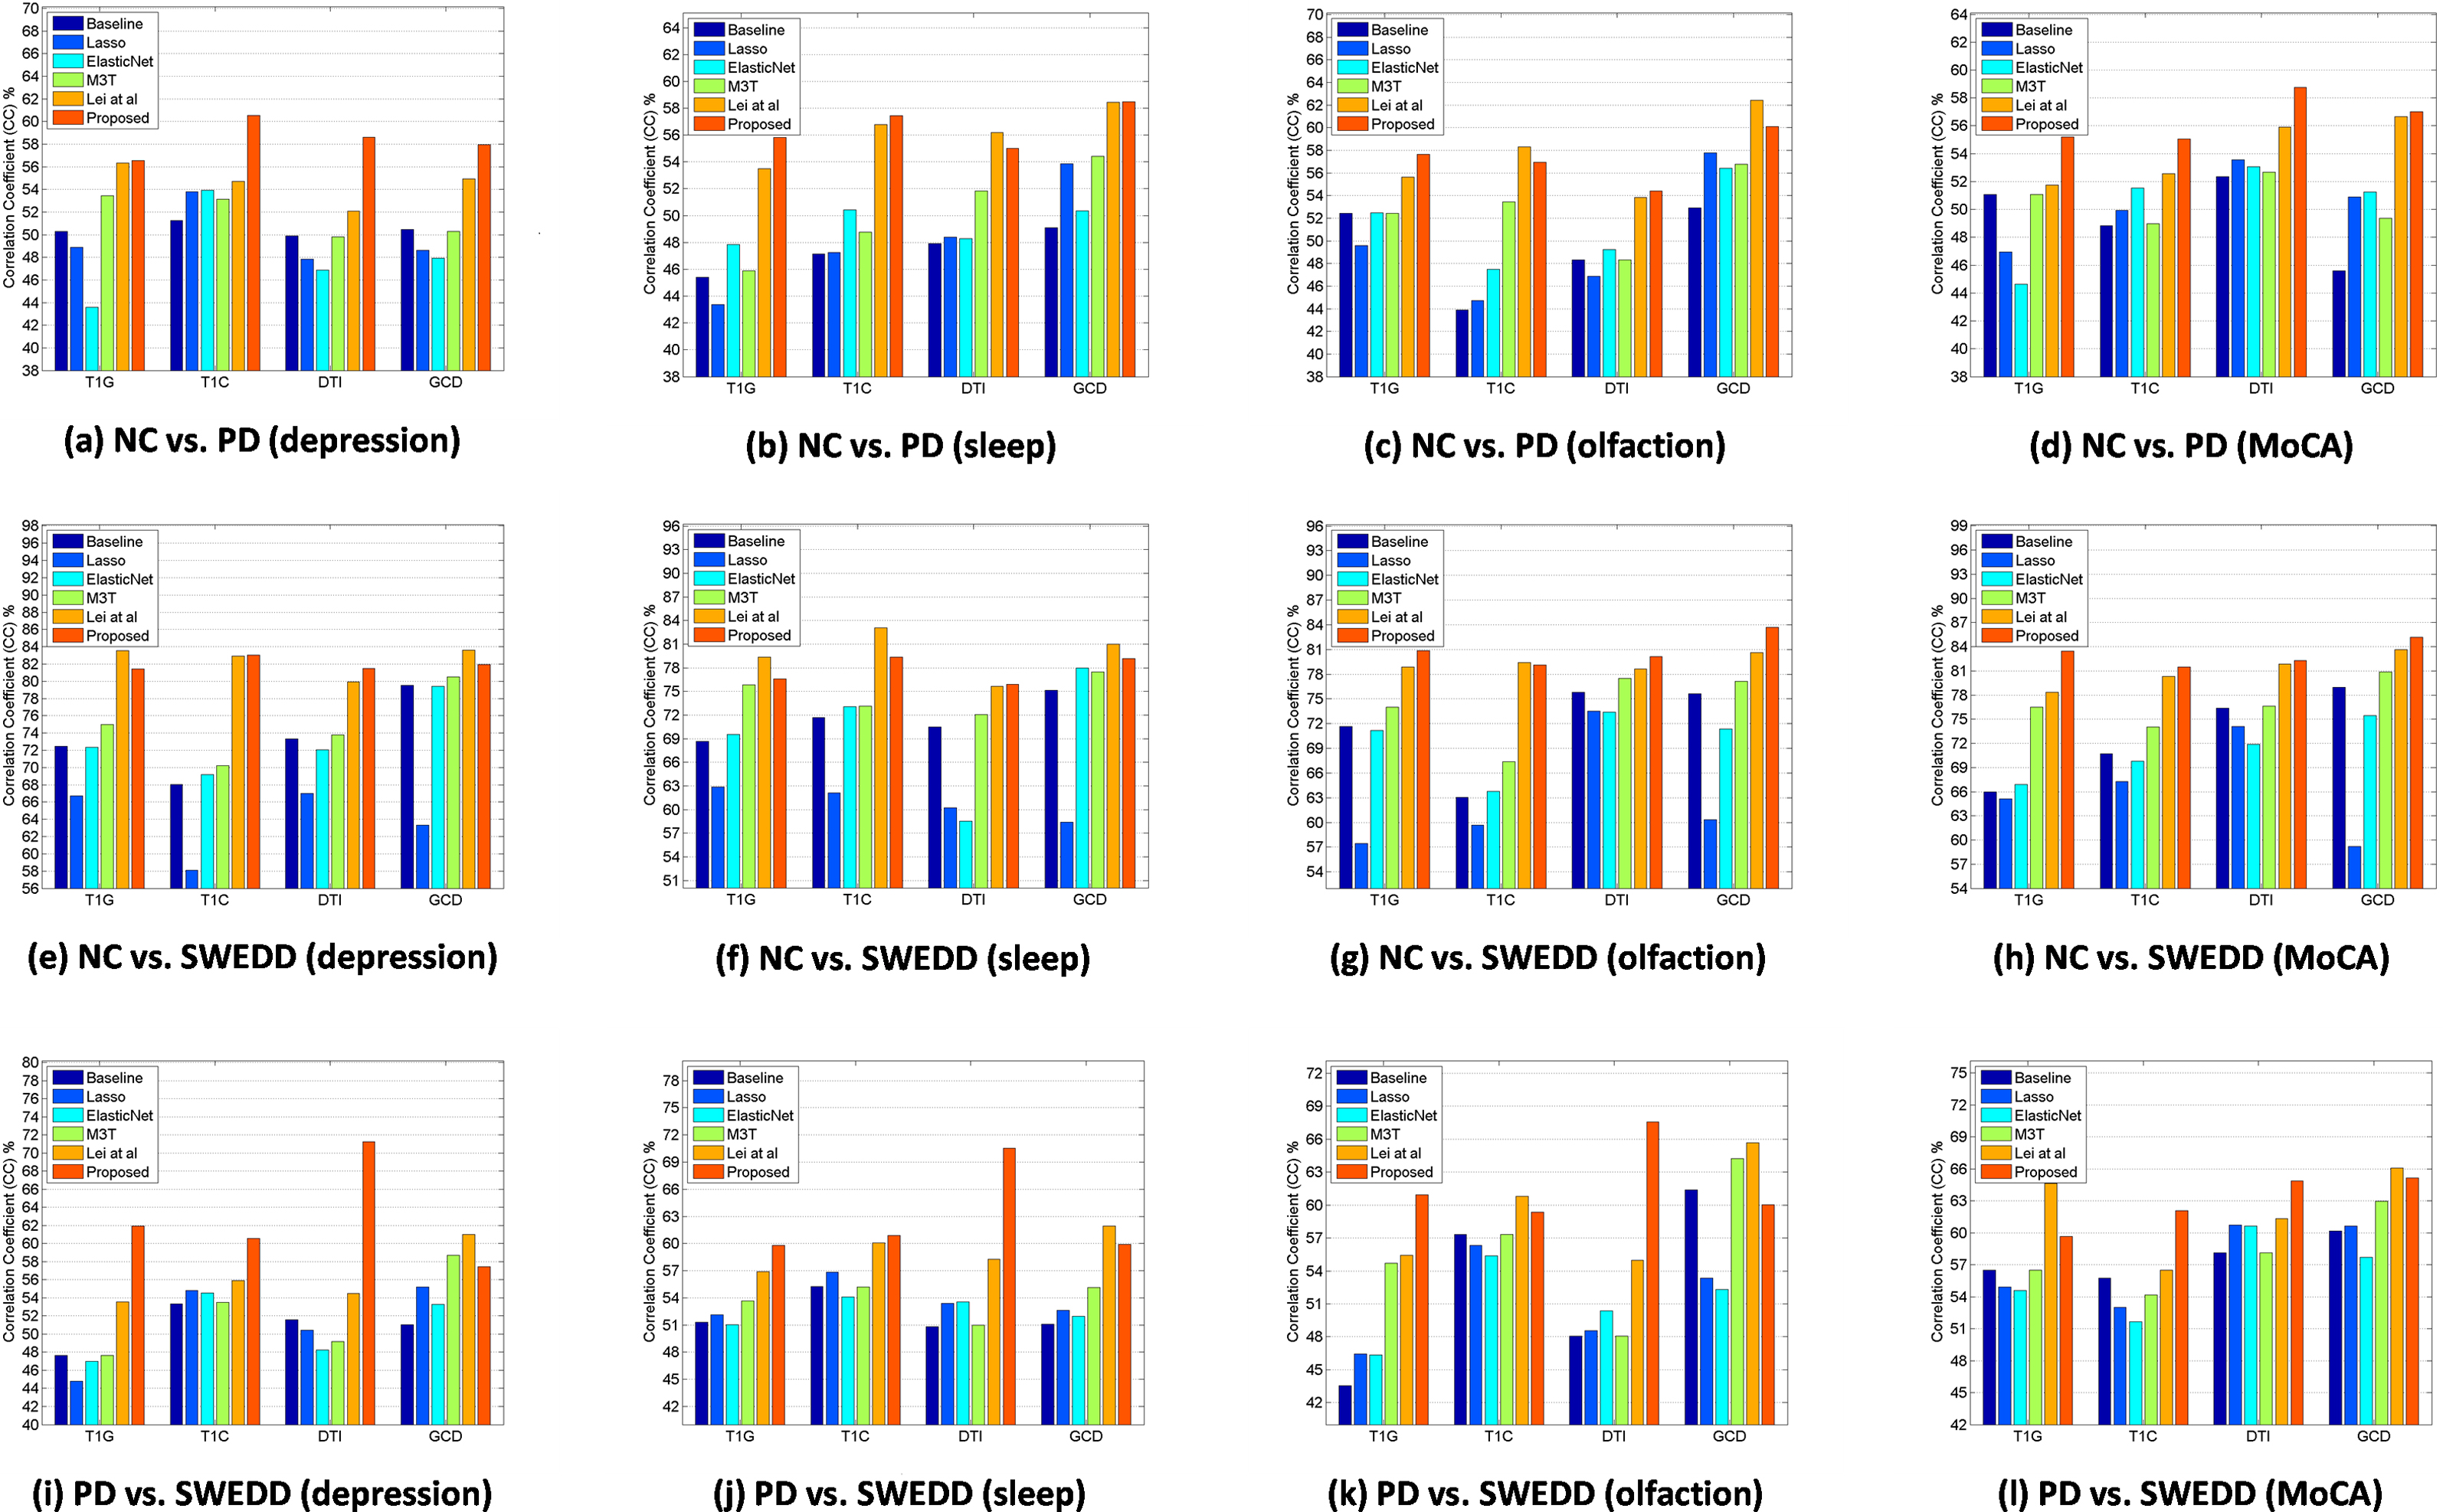 Comparison of correlation coefficient of depression scores, sleep scores, olfaction scores, and MoCA scores among all competing methods and proposed method using different features (Top: NC vs. PD, bottom: NC vs. SWEDD).